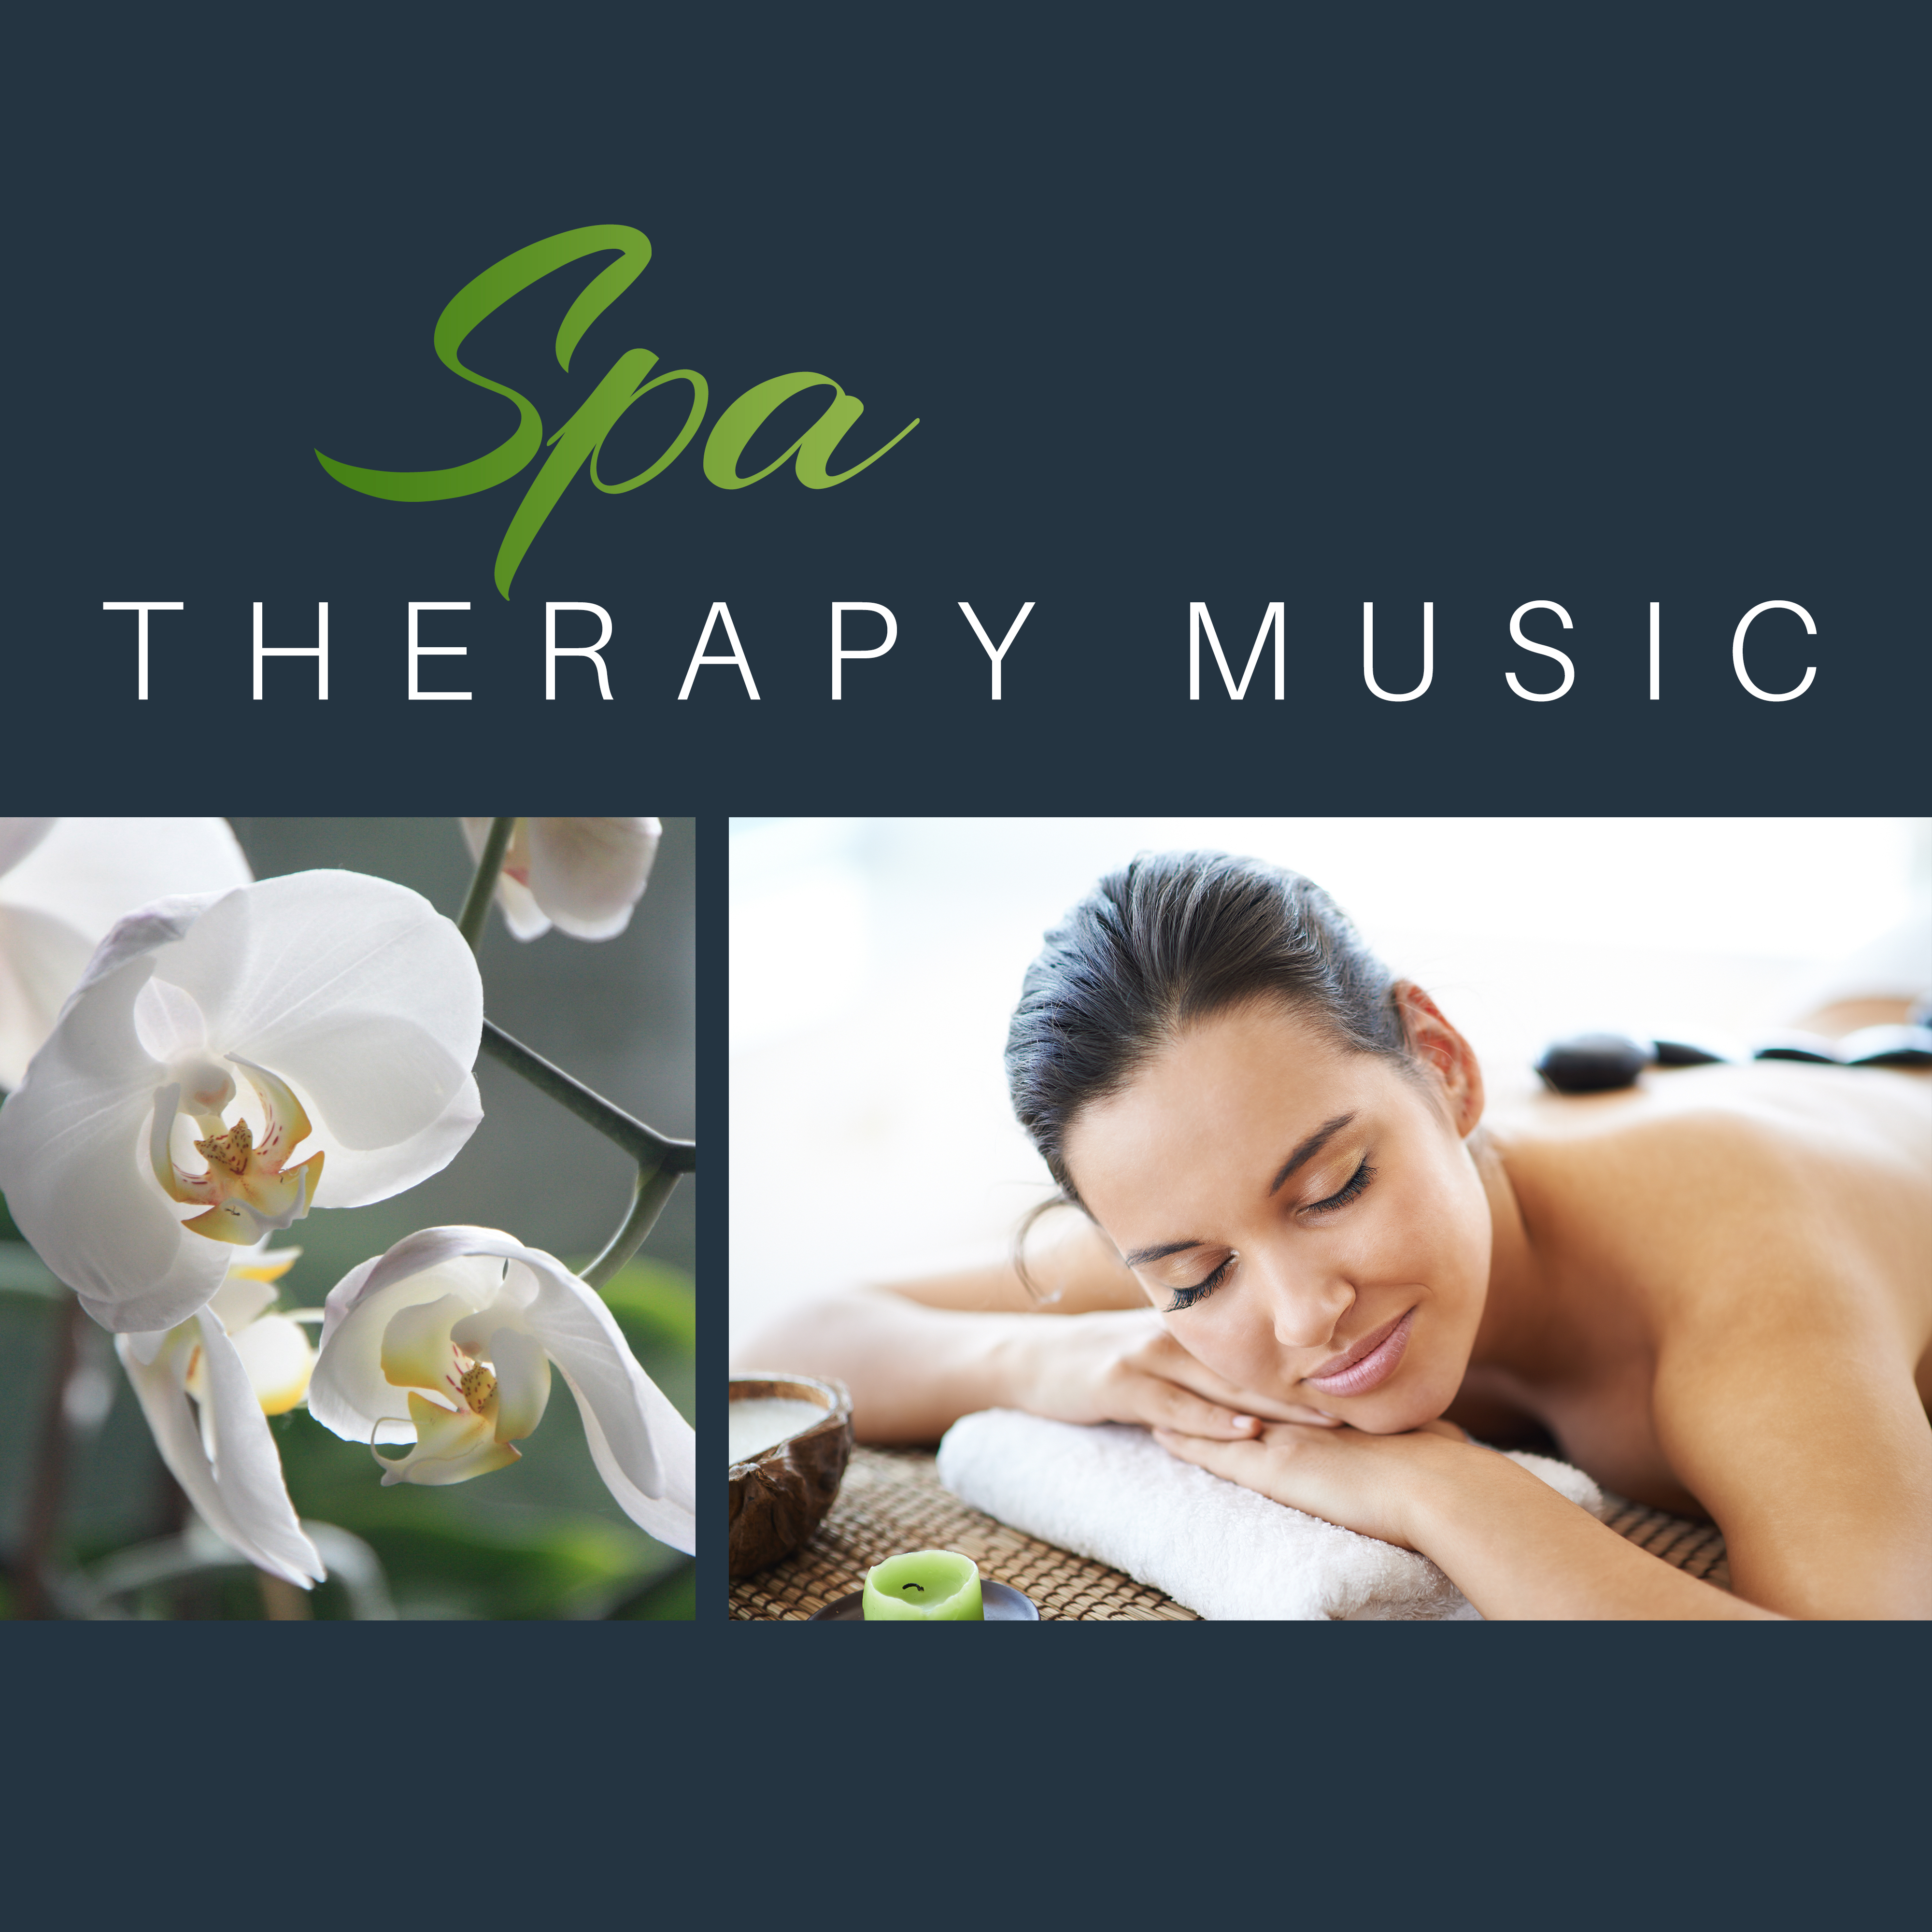 Spa Therapy Music  Relaxing Music, Full of Natural Sounds, Pure Relaxation, Calmness